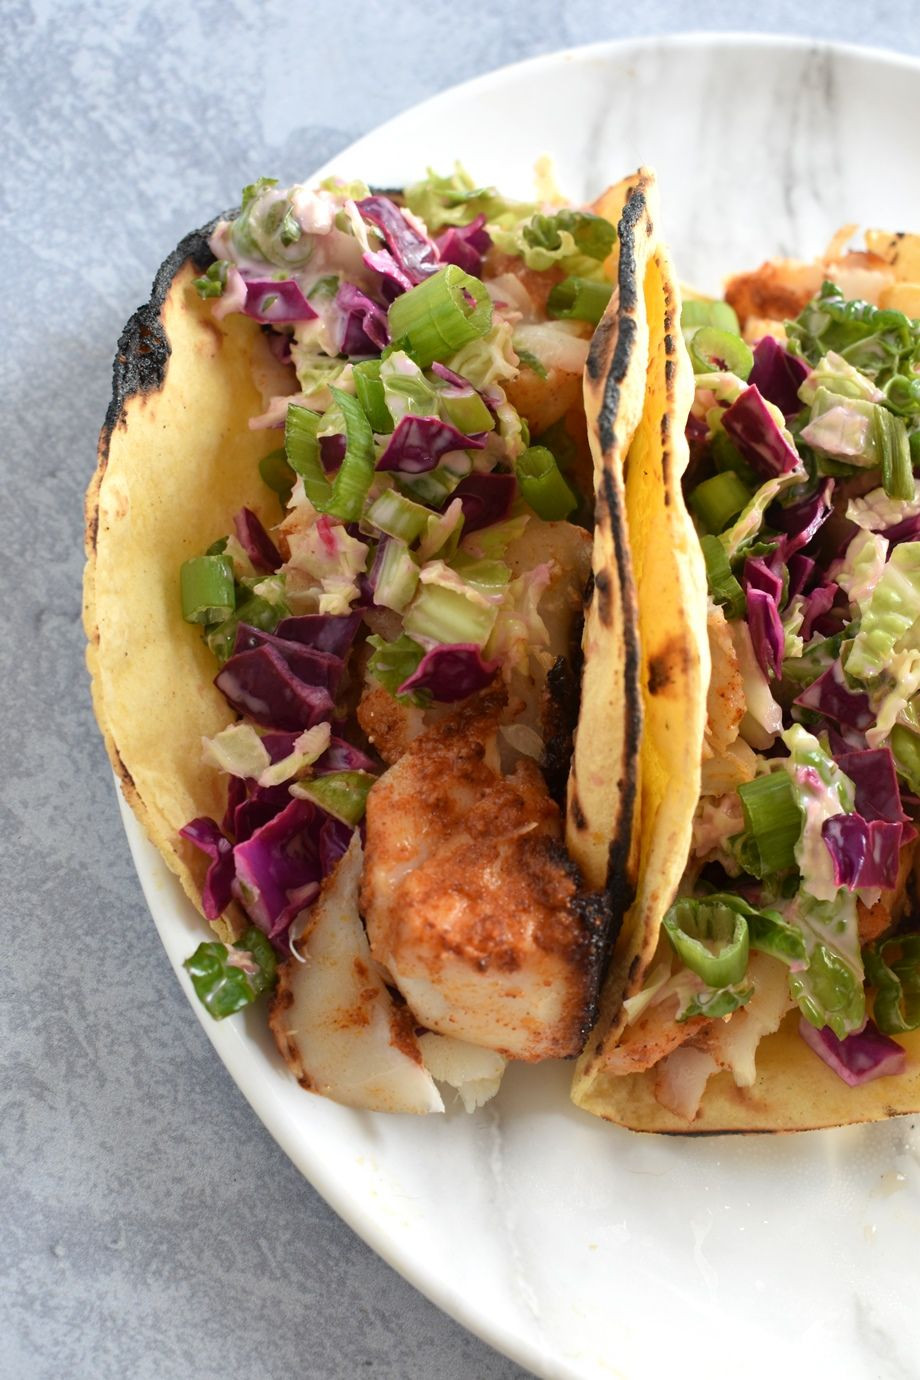 The Most Shared Coleslaw Recipes for Fish Tacos
 Of All Time